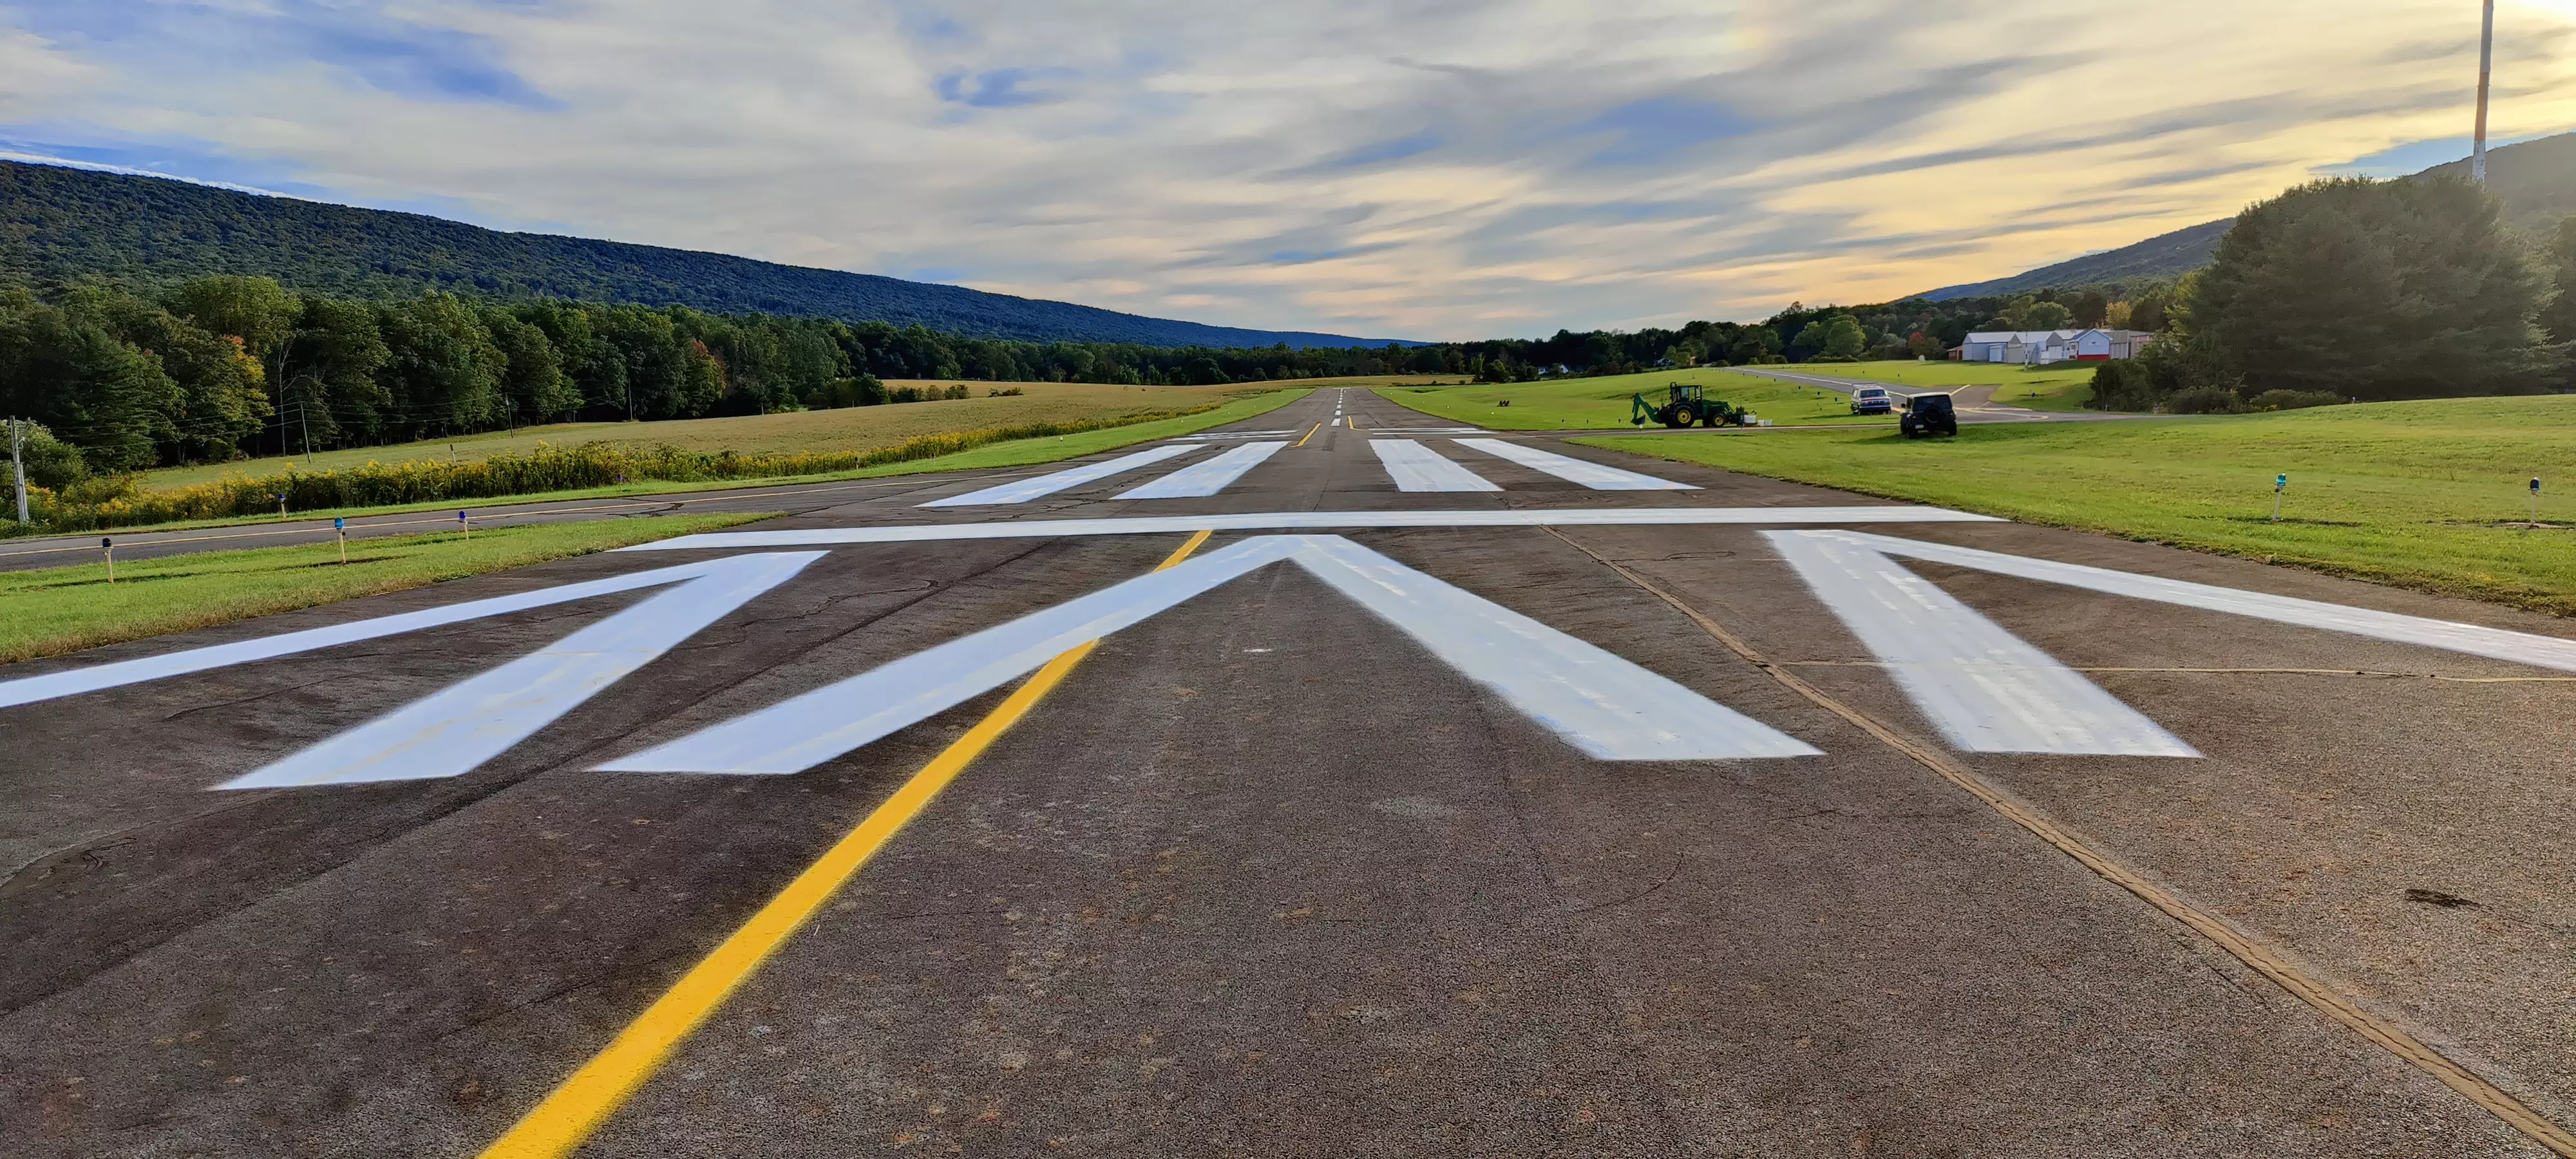 An image of a rural airport runway that lies in a valley between two mountains.